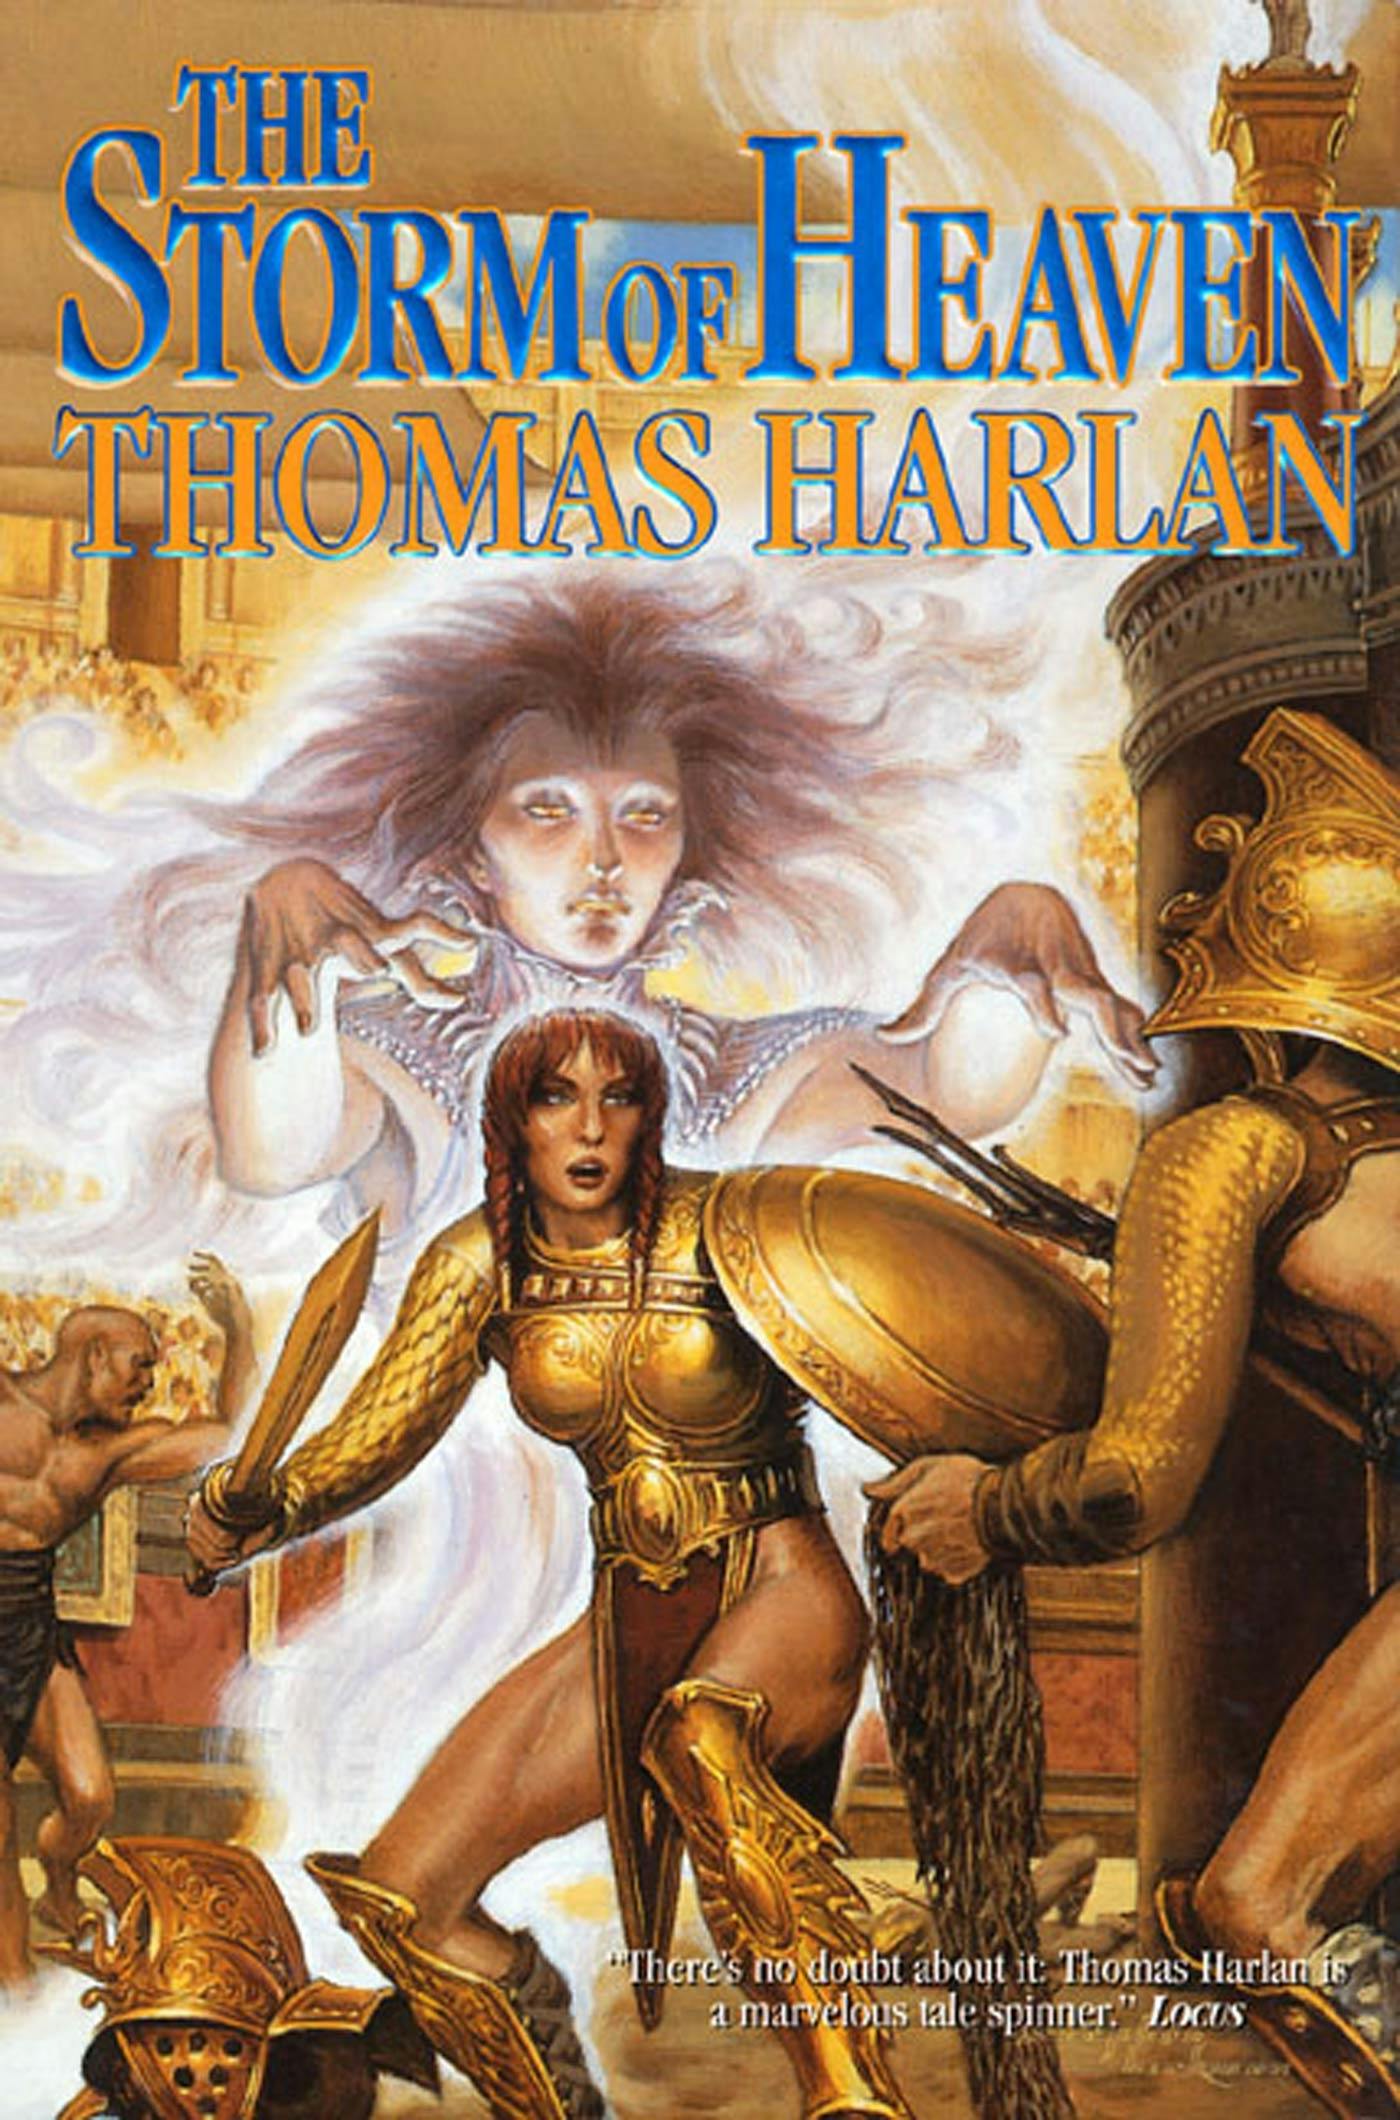 Cover for the book titled as: The Storm of Heaven